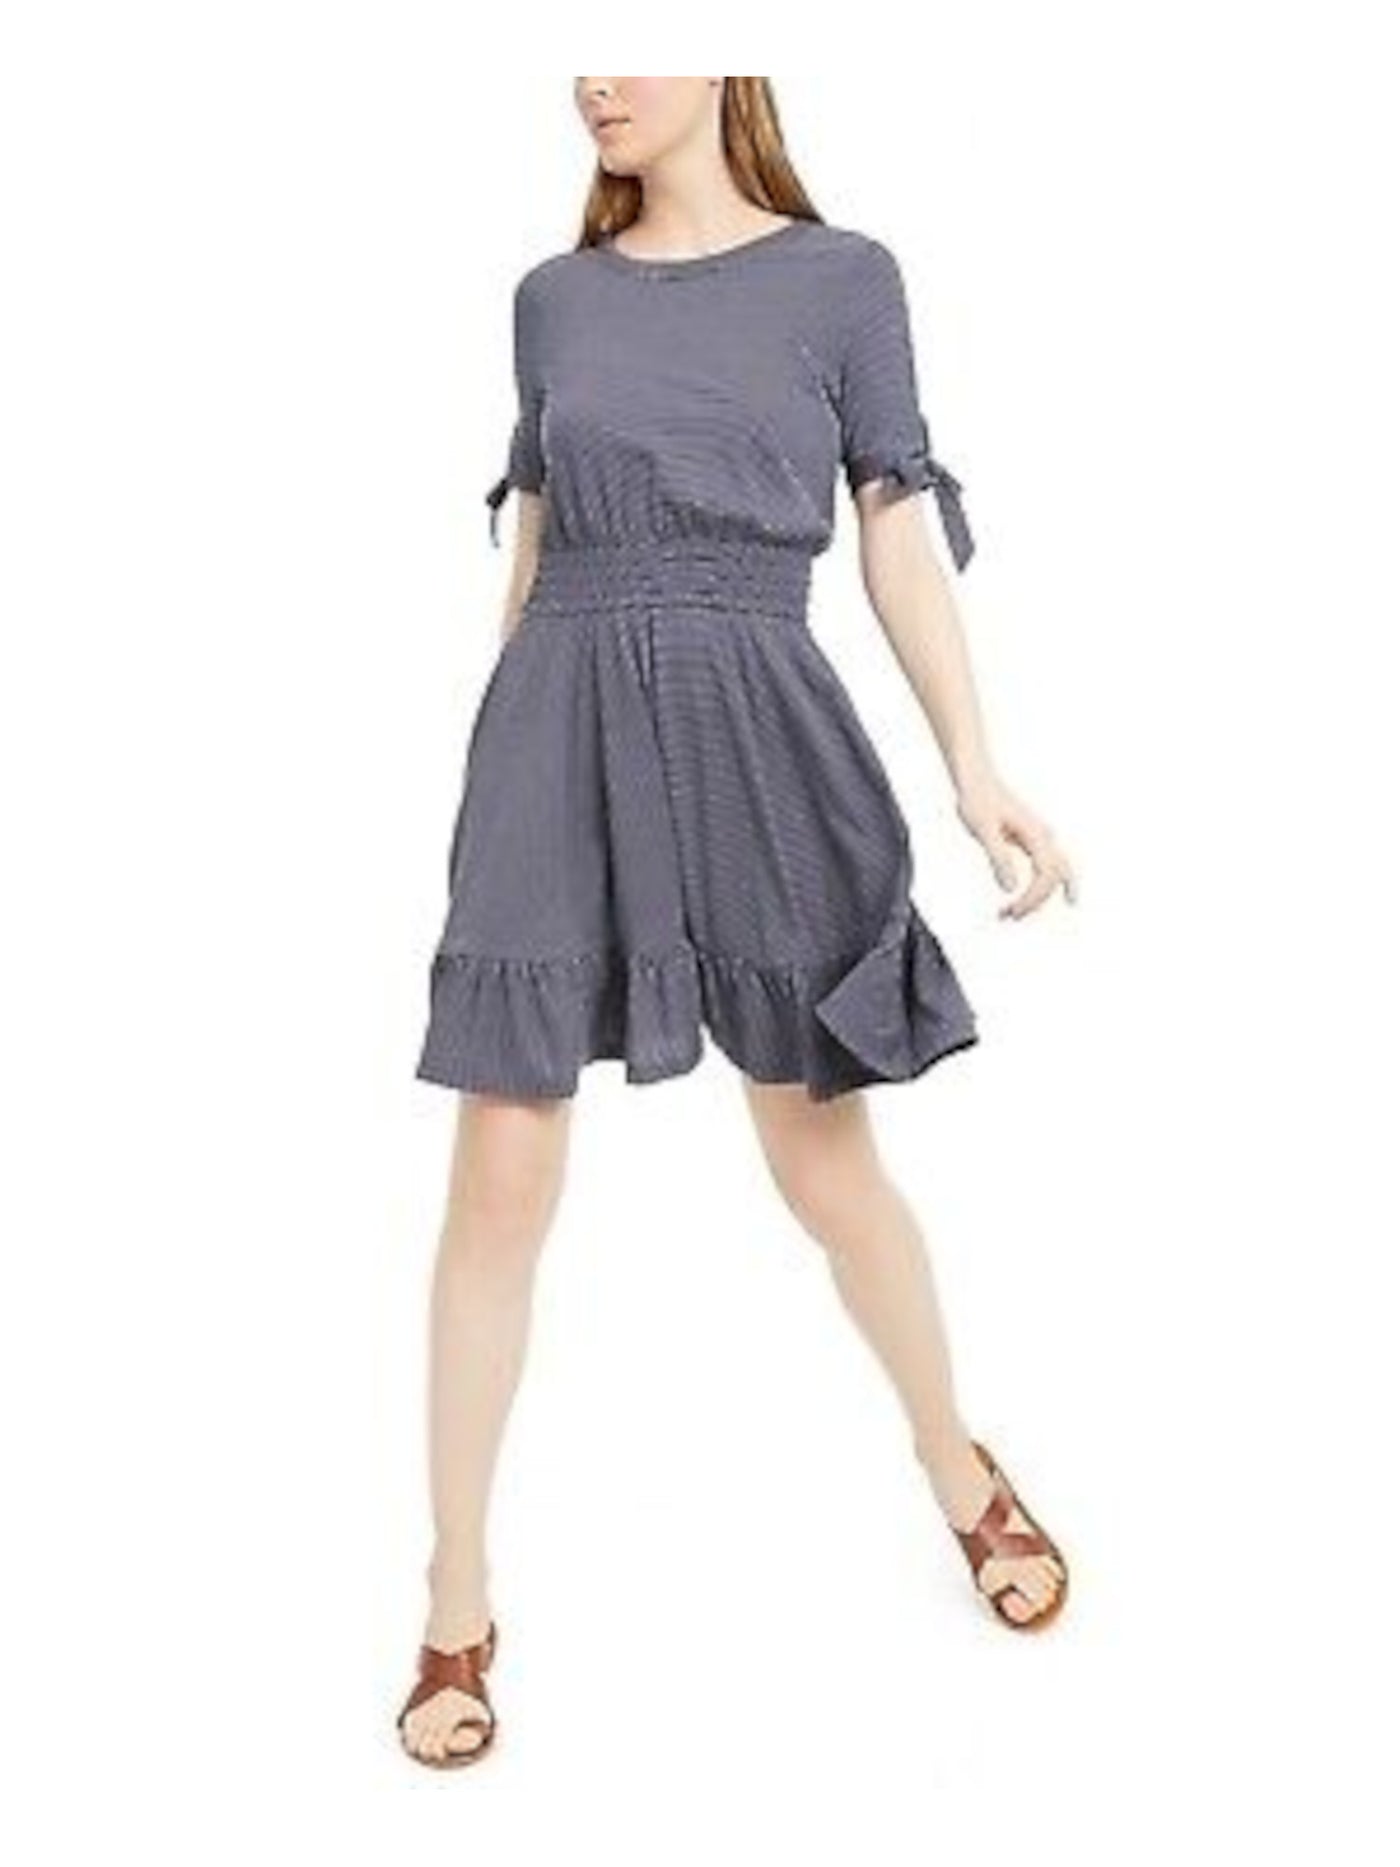 MAISON JULES Womens Navy Striped Short Sleeve Crew Neck Above The Knee Trapeze Dress S